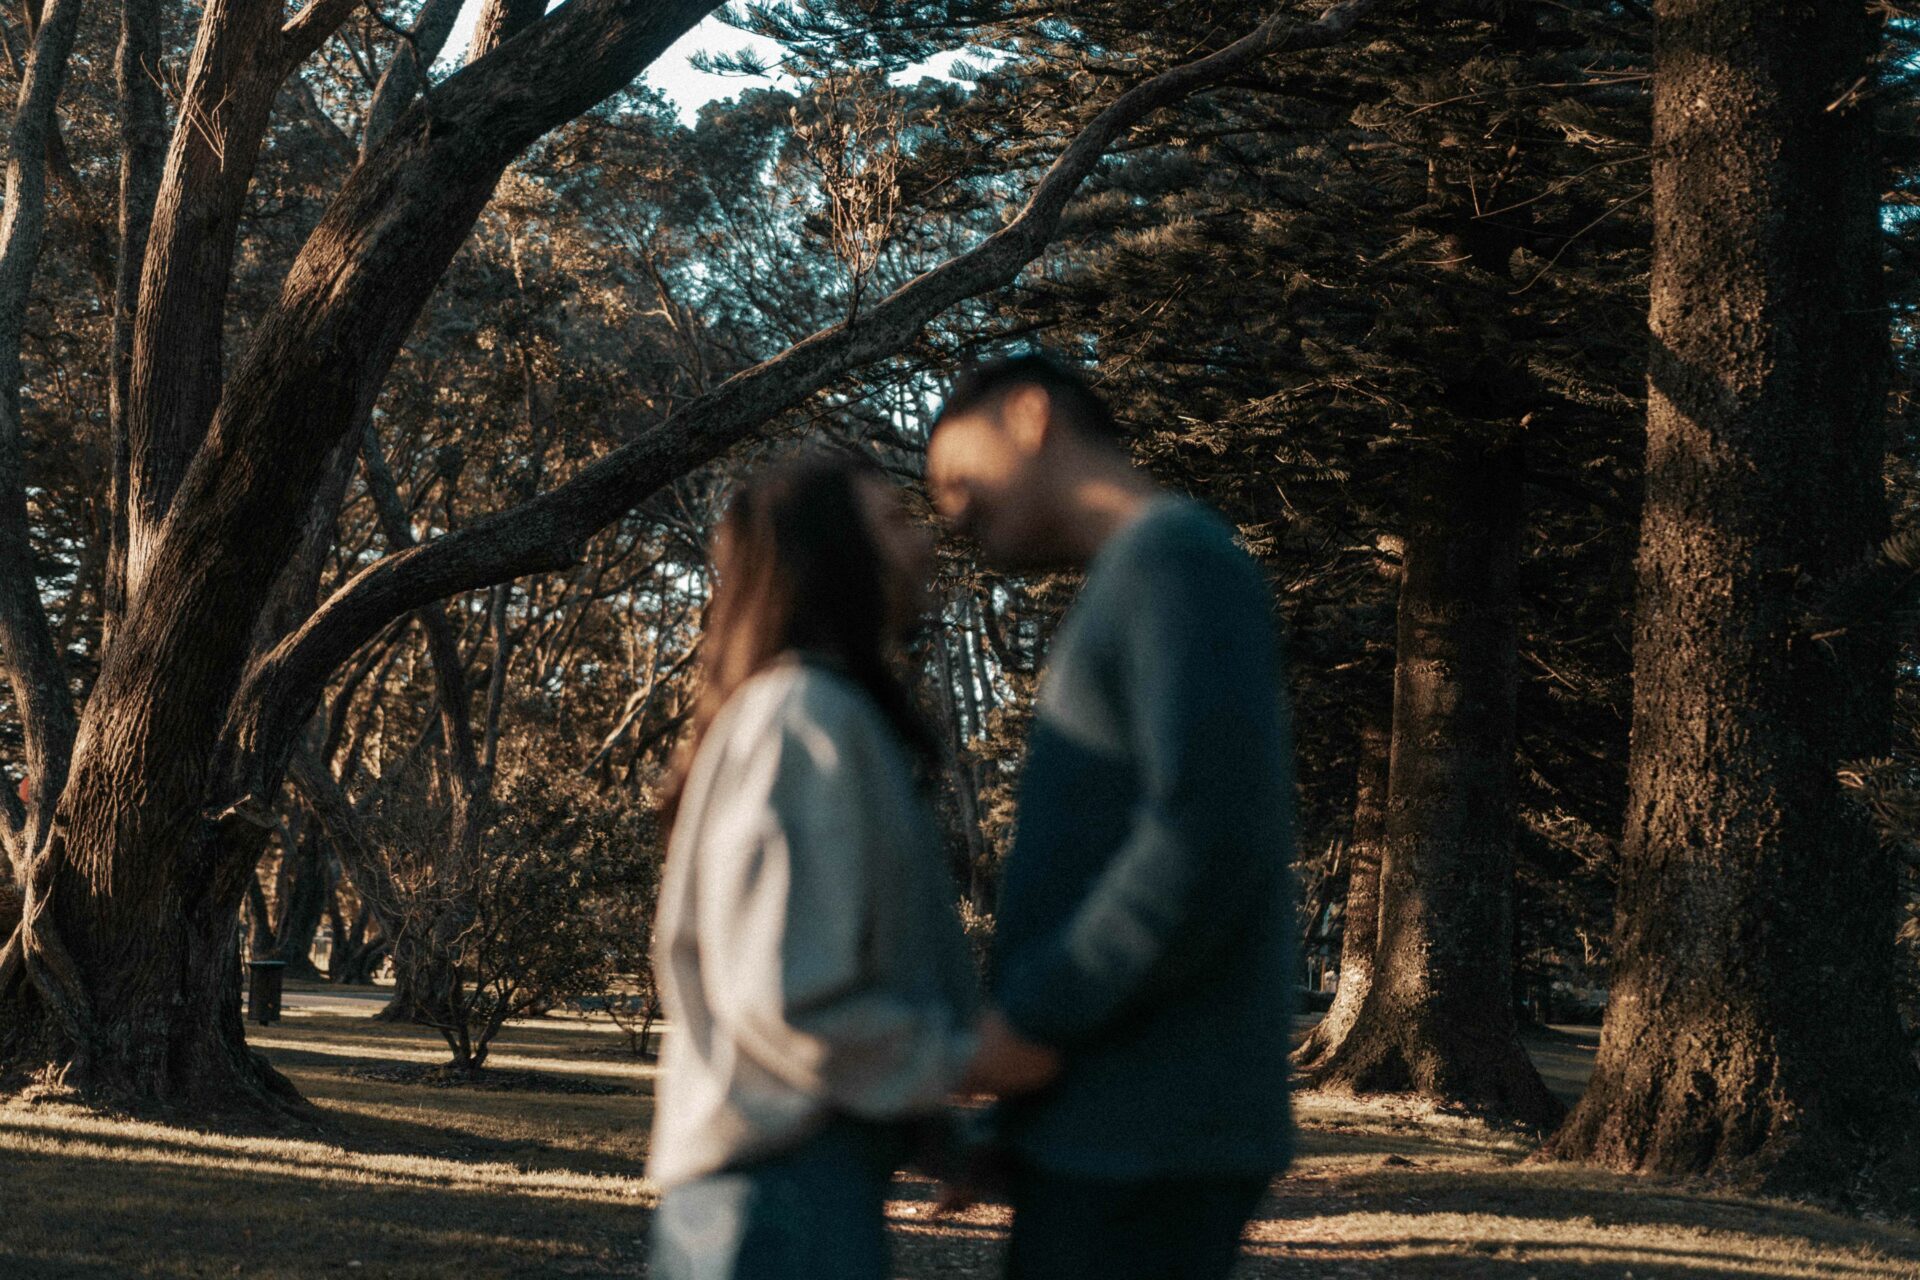 Taking engagement photos is an exciting time.